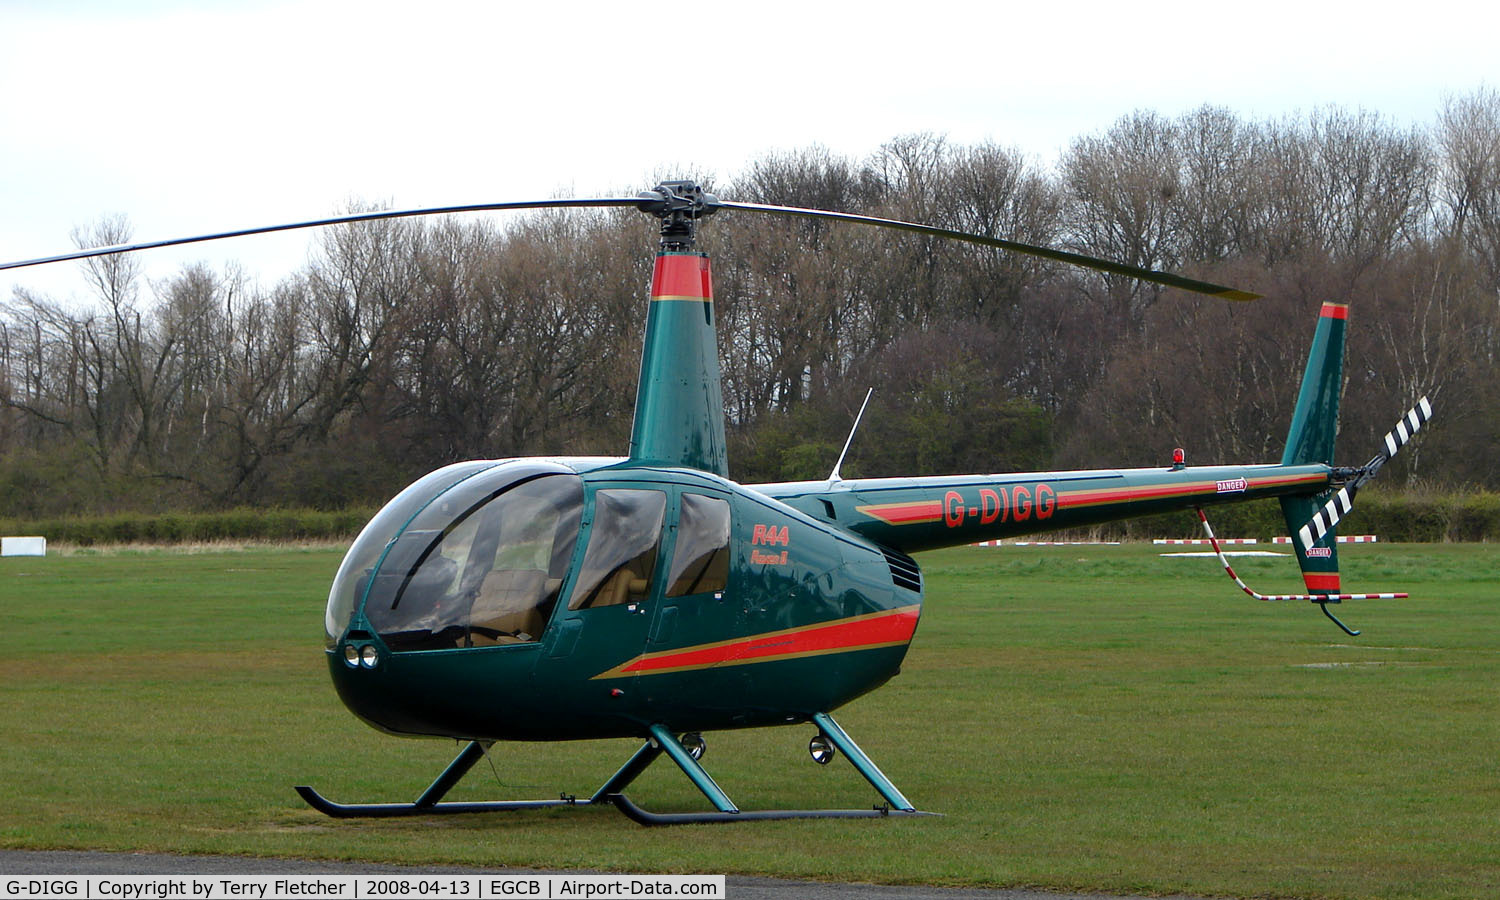 G-DIGG, 2007 Robinson R44 Raven II C/N 11904, One of 8 Helicopter vistors to Barton Airfield for the Manchester United v Arsenal Soccer match